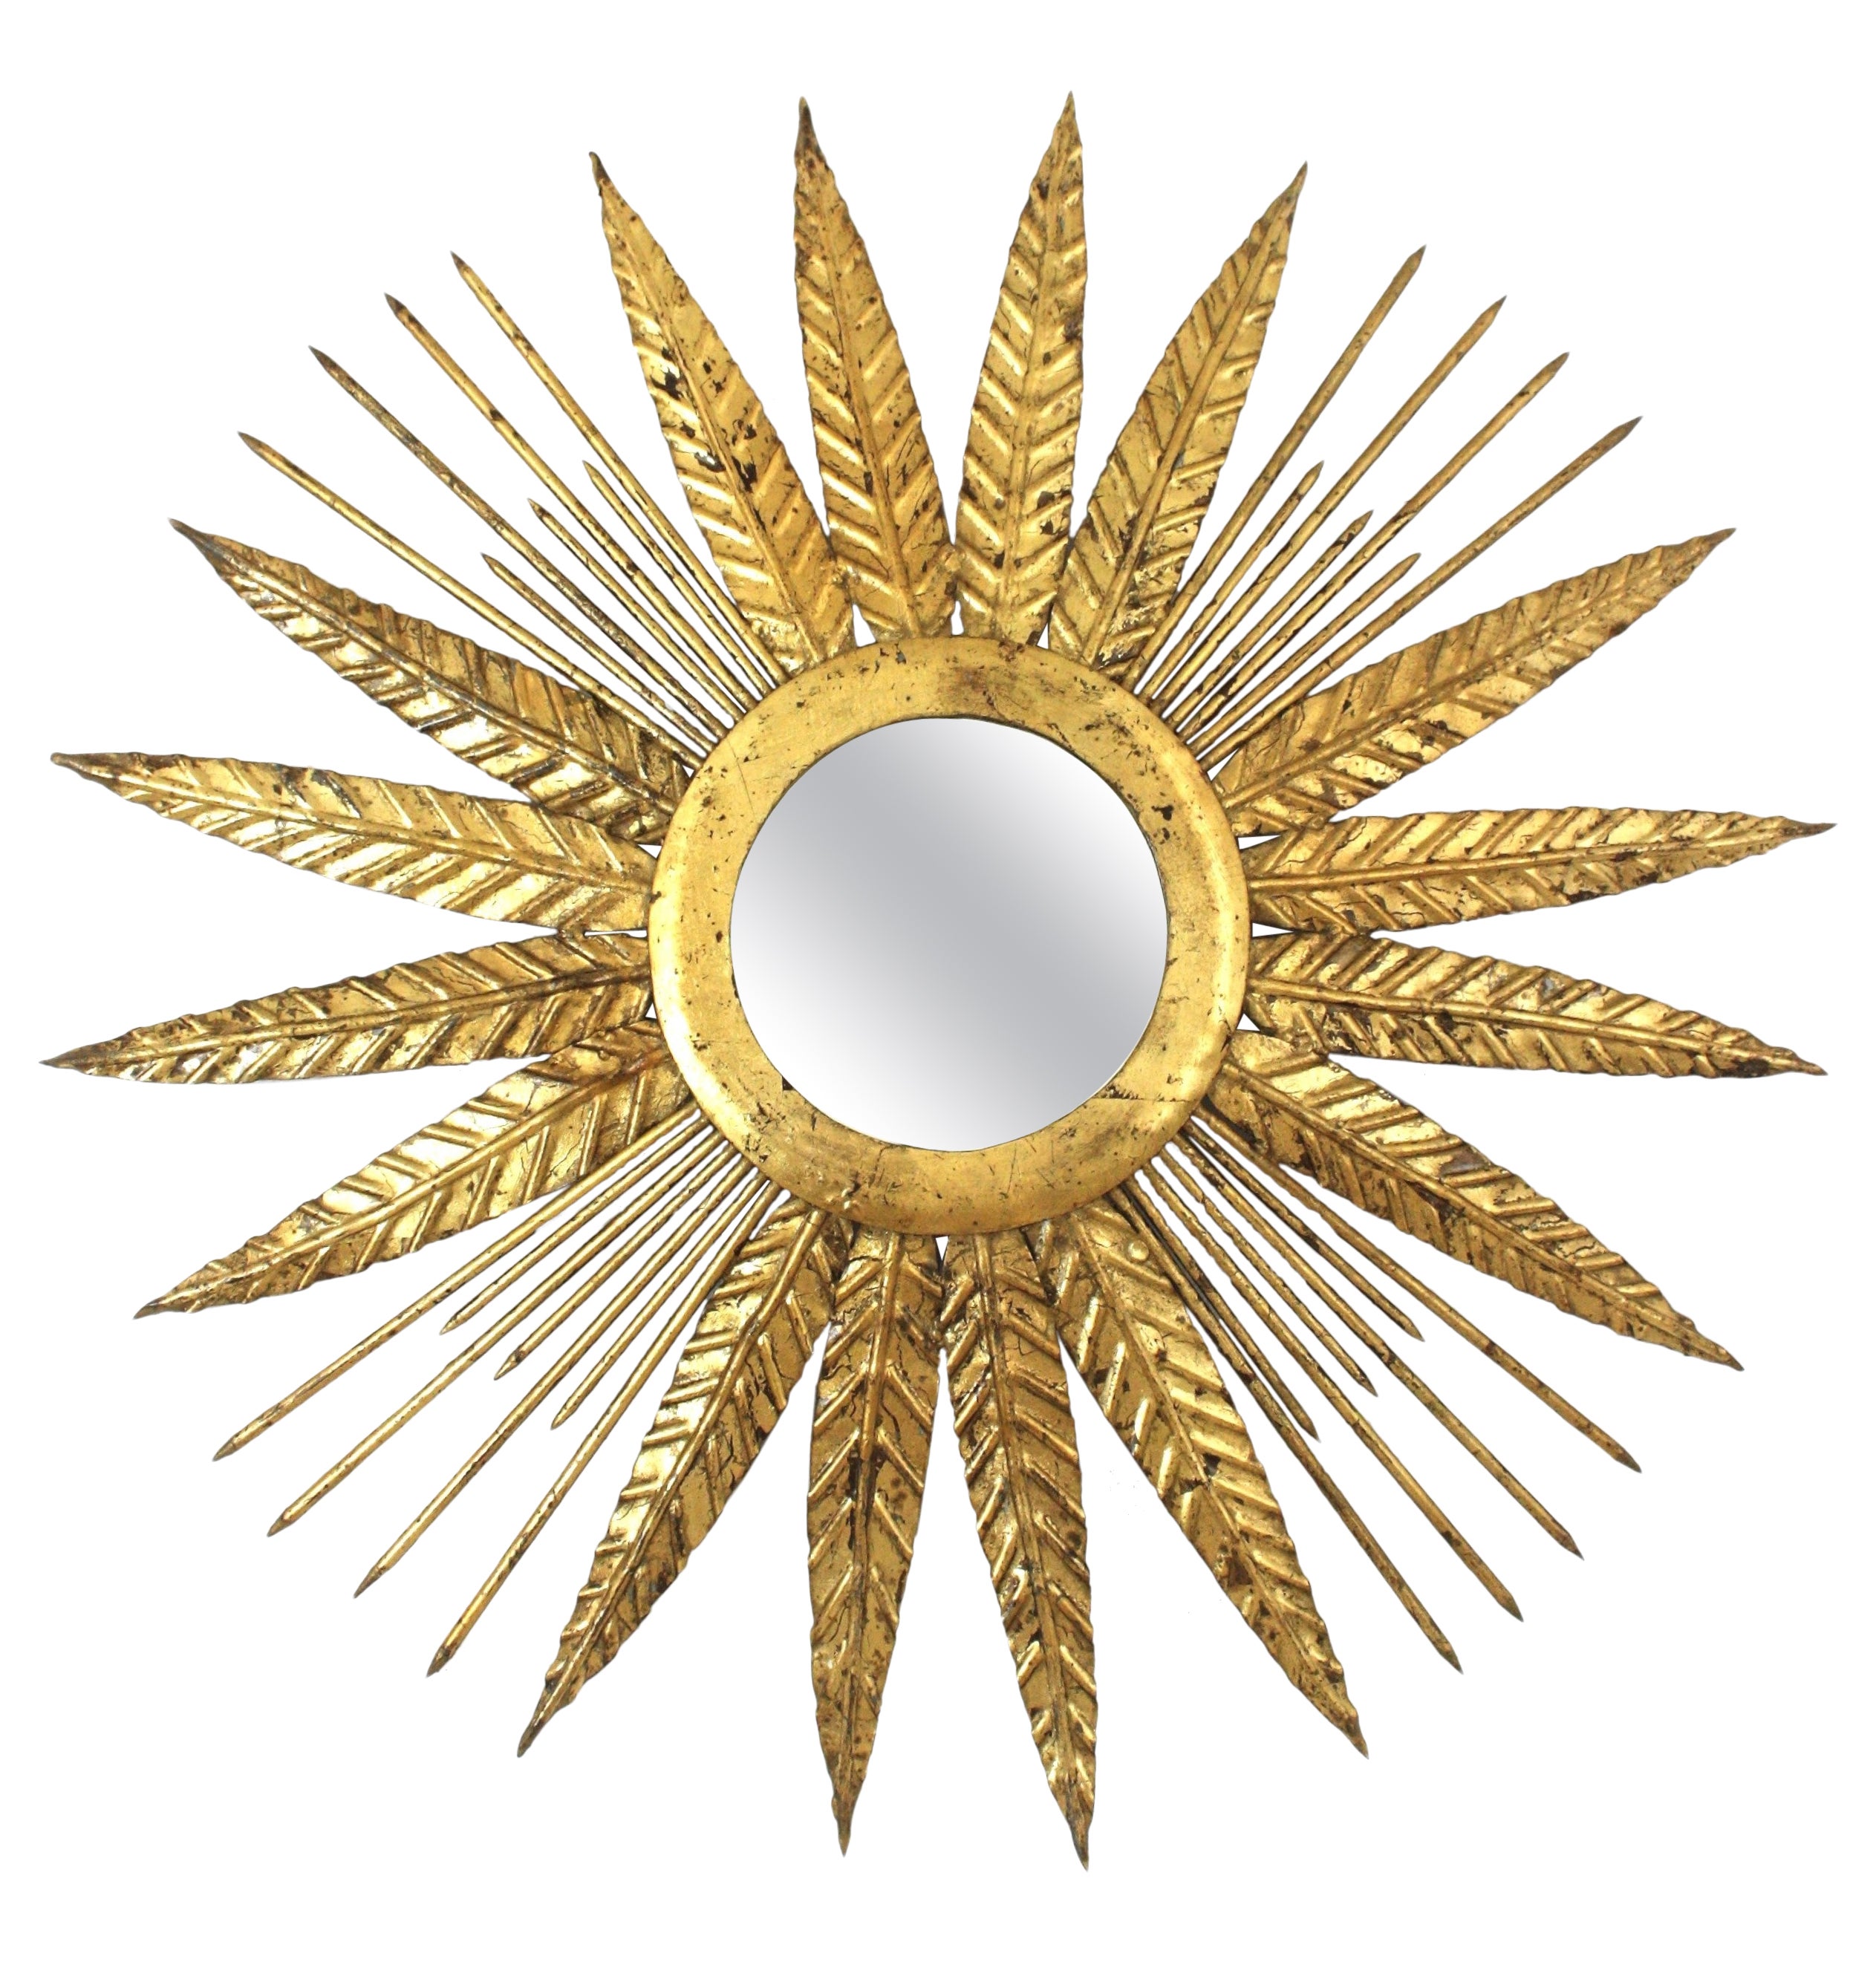 French Sunburst Mirror in Gilt Iron with Spikey Leafed Frame, 1940s For Sale